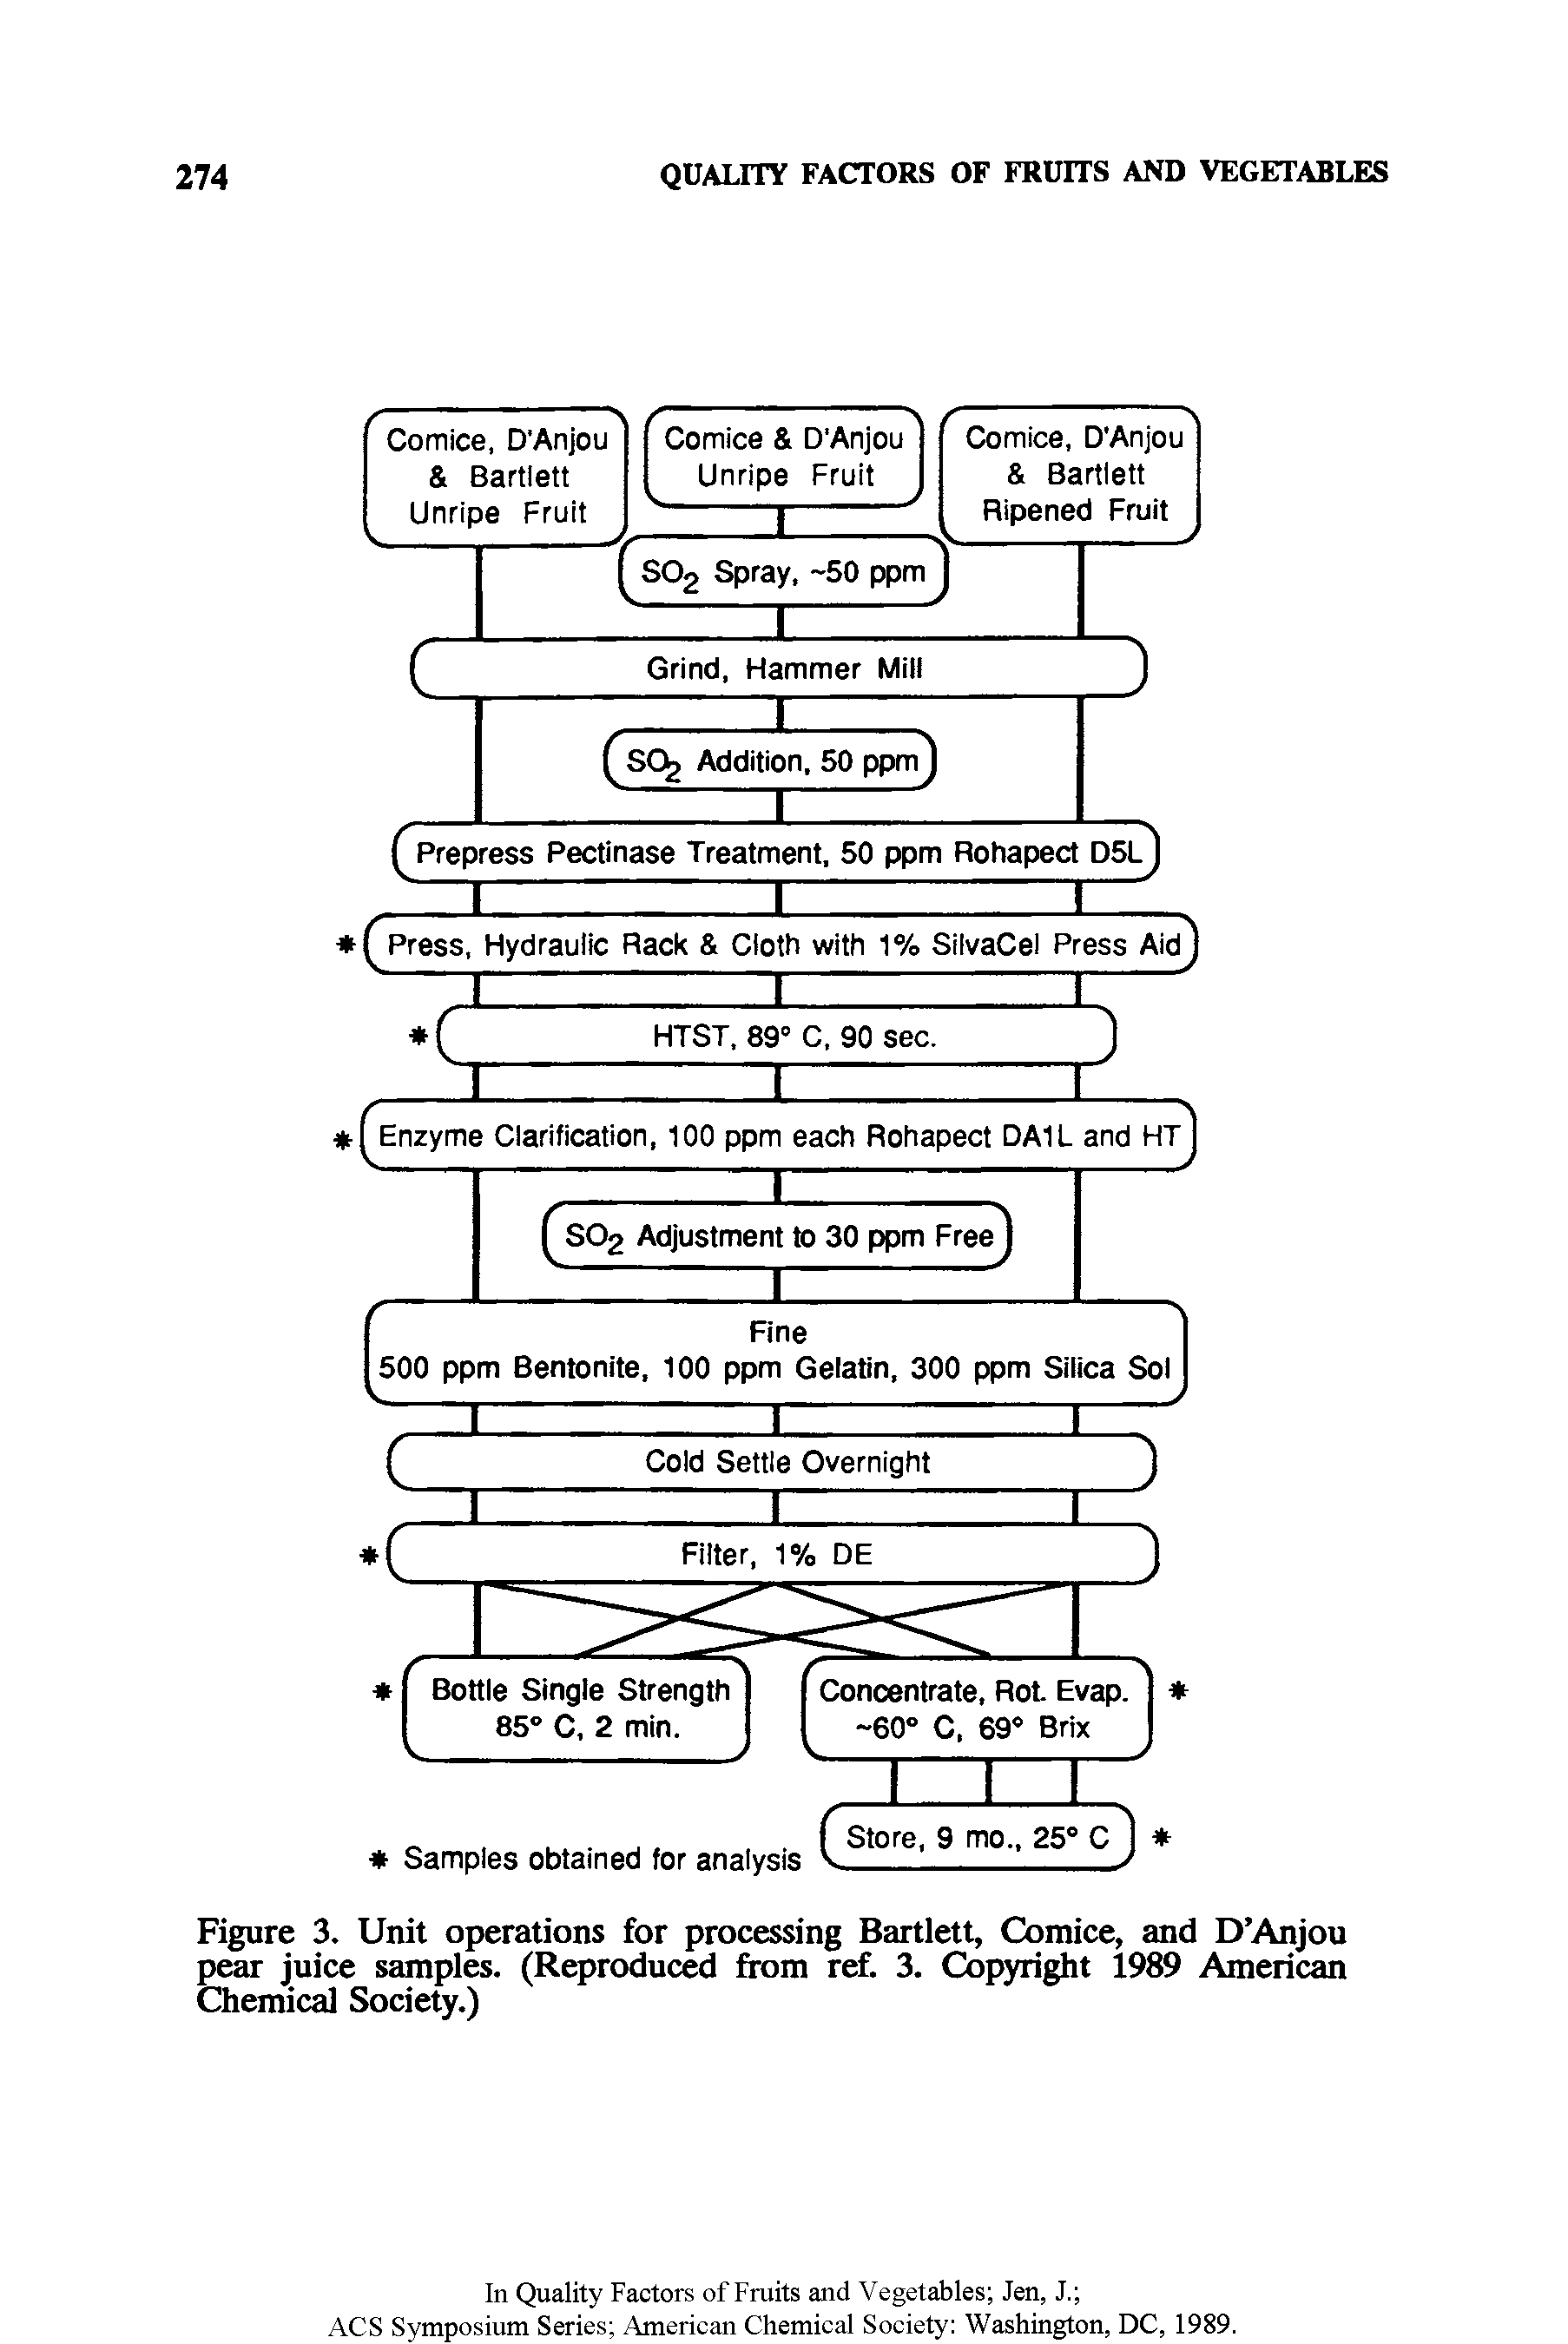 Figure 3. Unit operations for processing Bartlett, Comice, and D Anjou pear juice samples. (Reproduced from ref. 3. Copyright 1989 American Chemical Society.)...